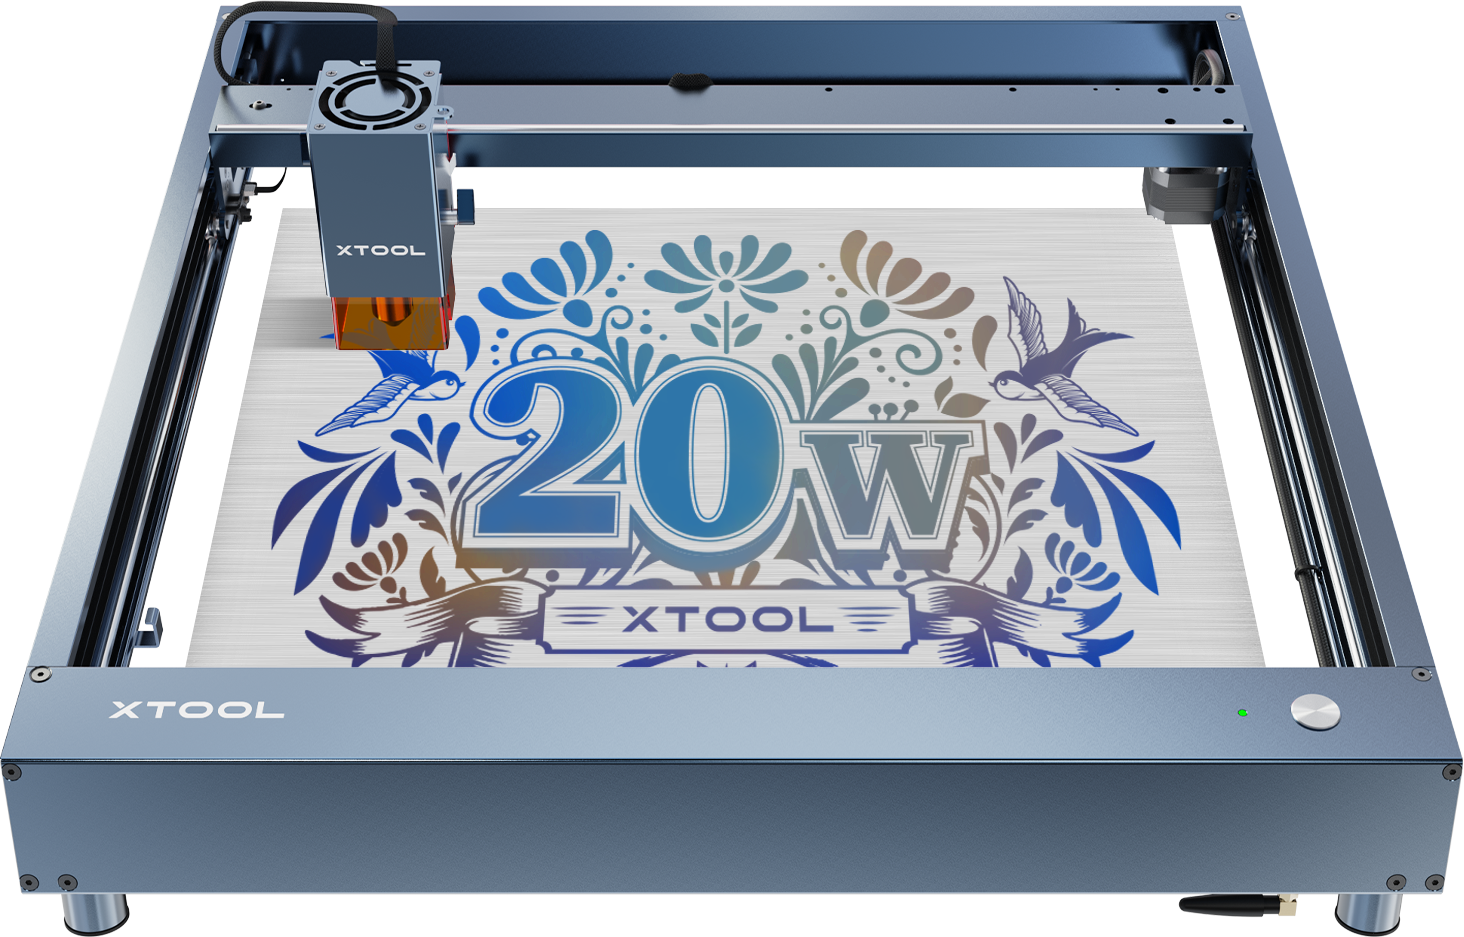 xTool - D1 Pro - 20W - Higher Accuracy Diode DIY Laser Engraver & Cutting Machine